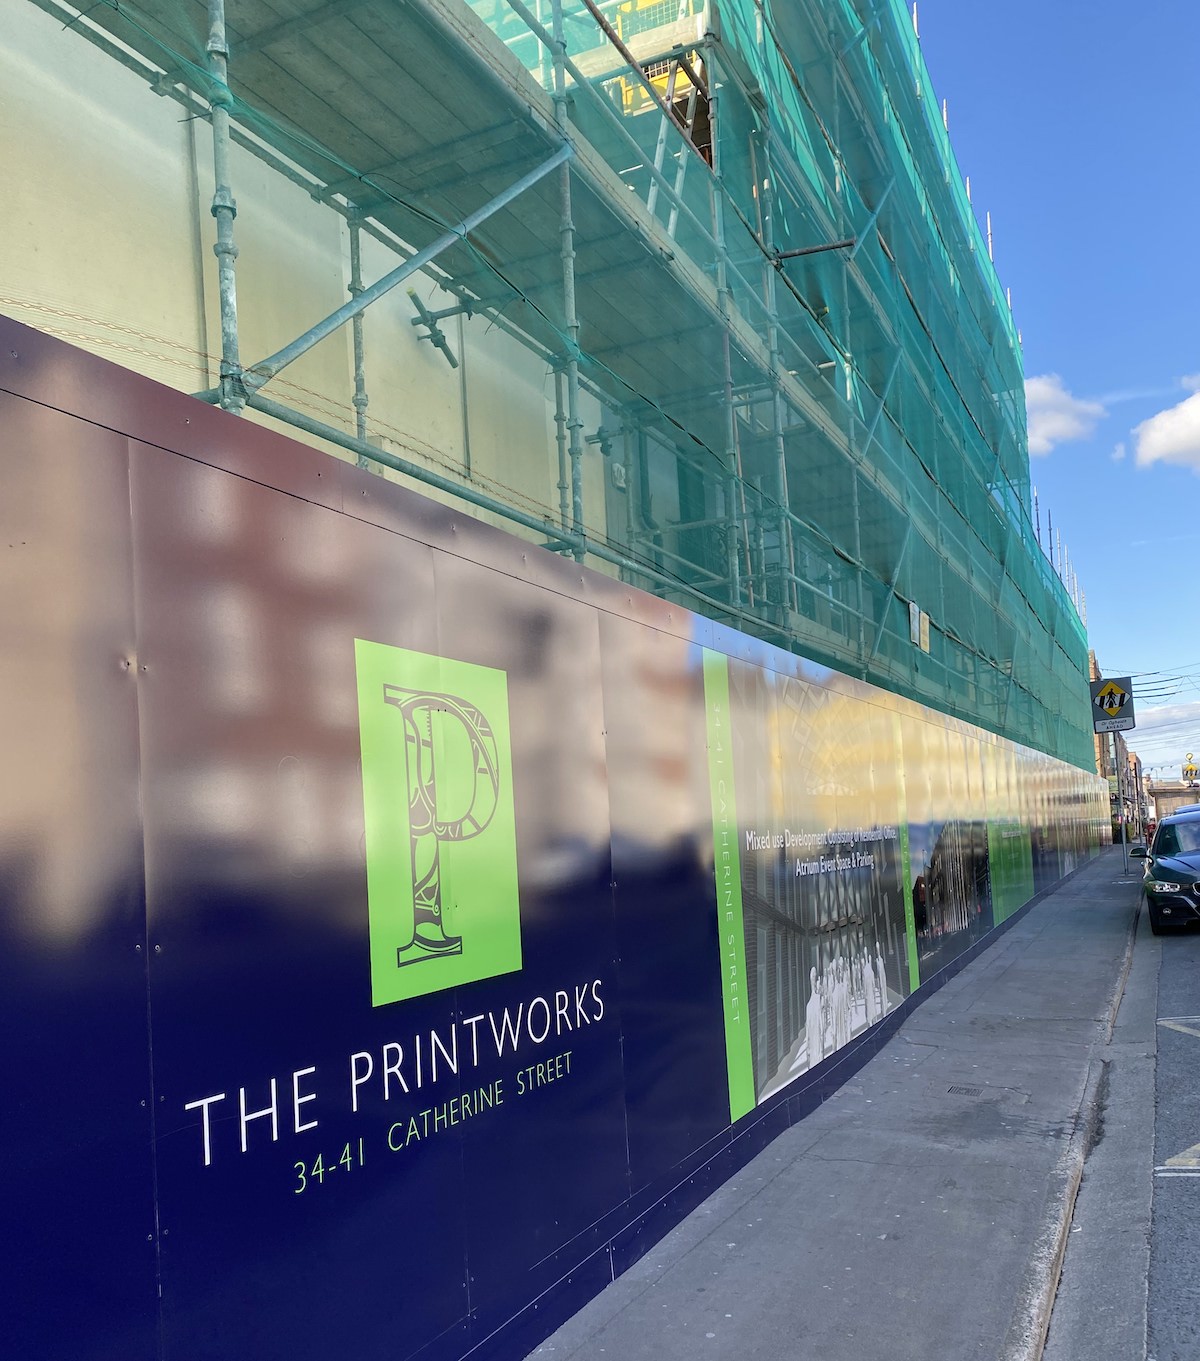 The Printworks Catherine Street - Work has begun on the €14m apartment development which will provide 24 apartments in the area along with an office complex